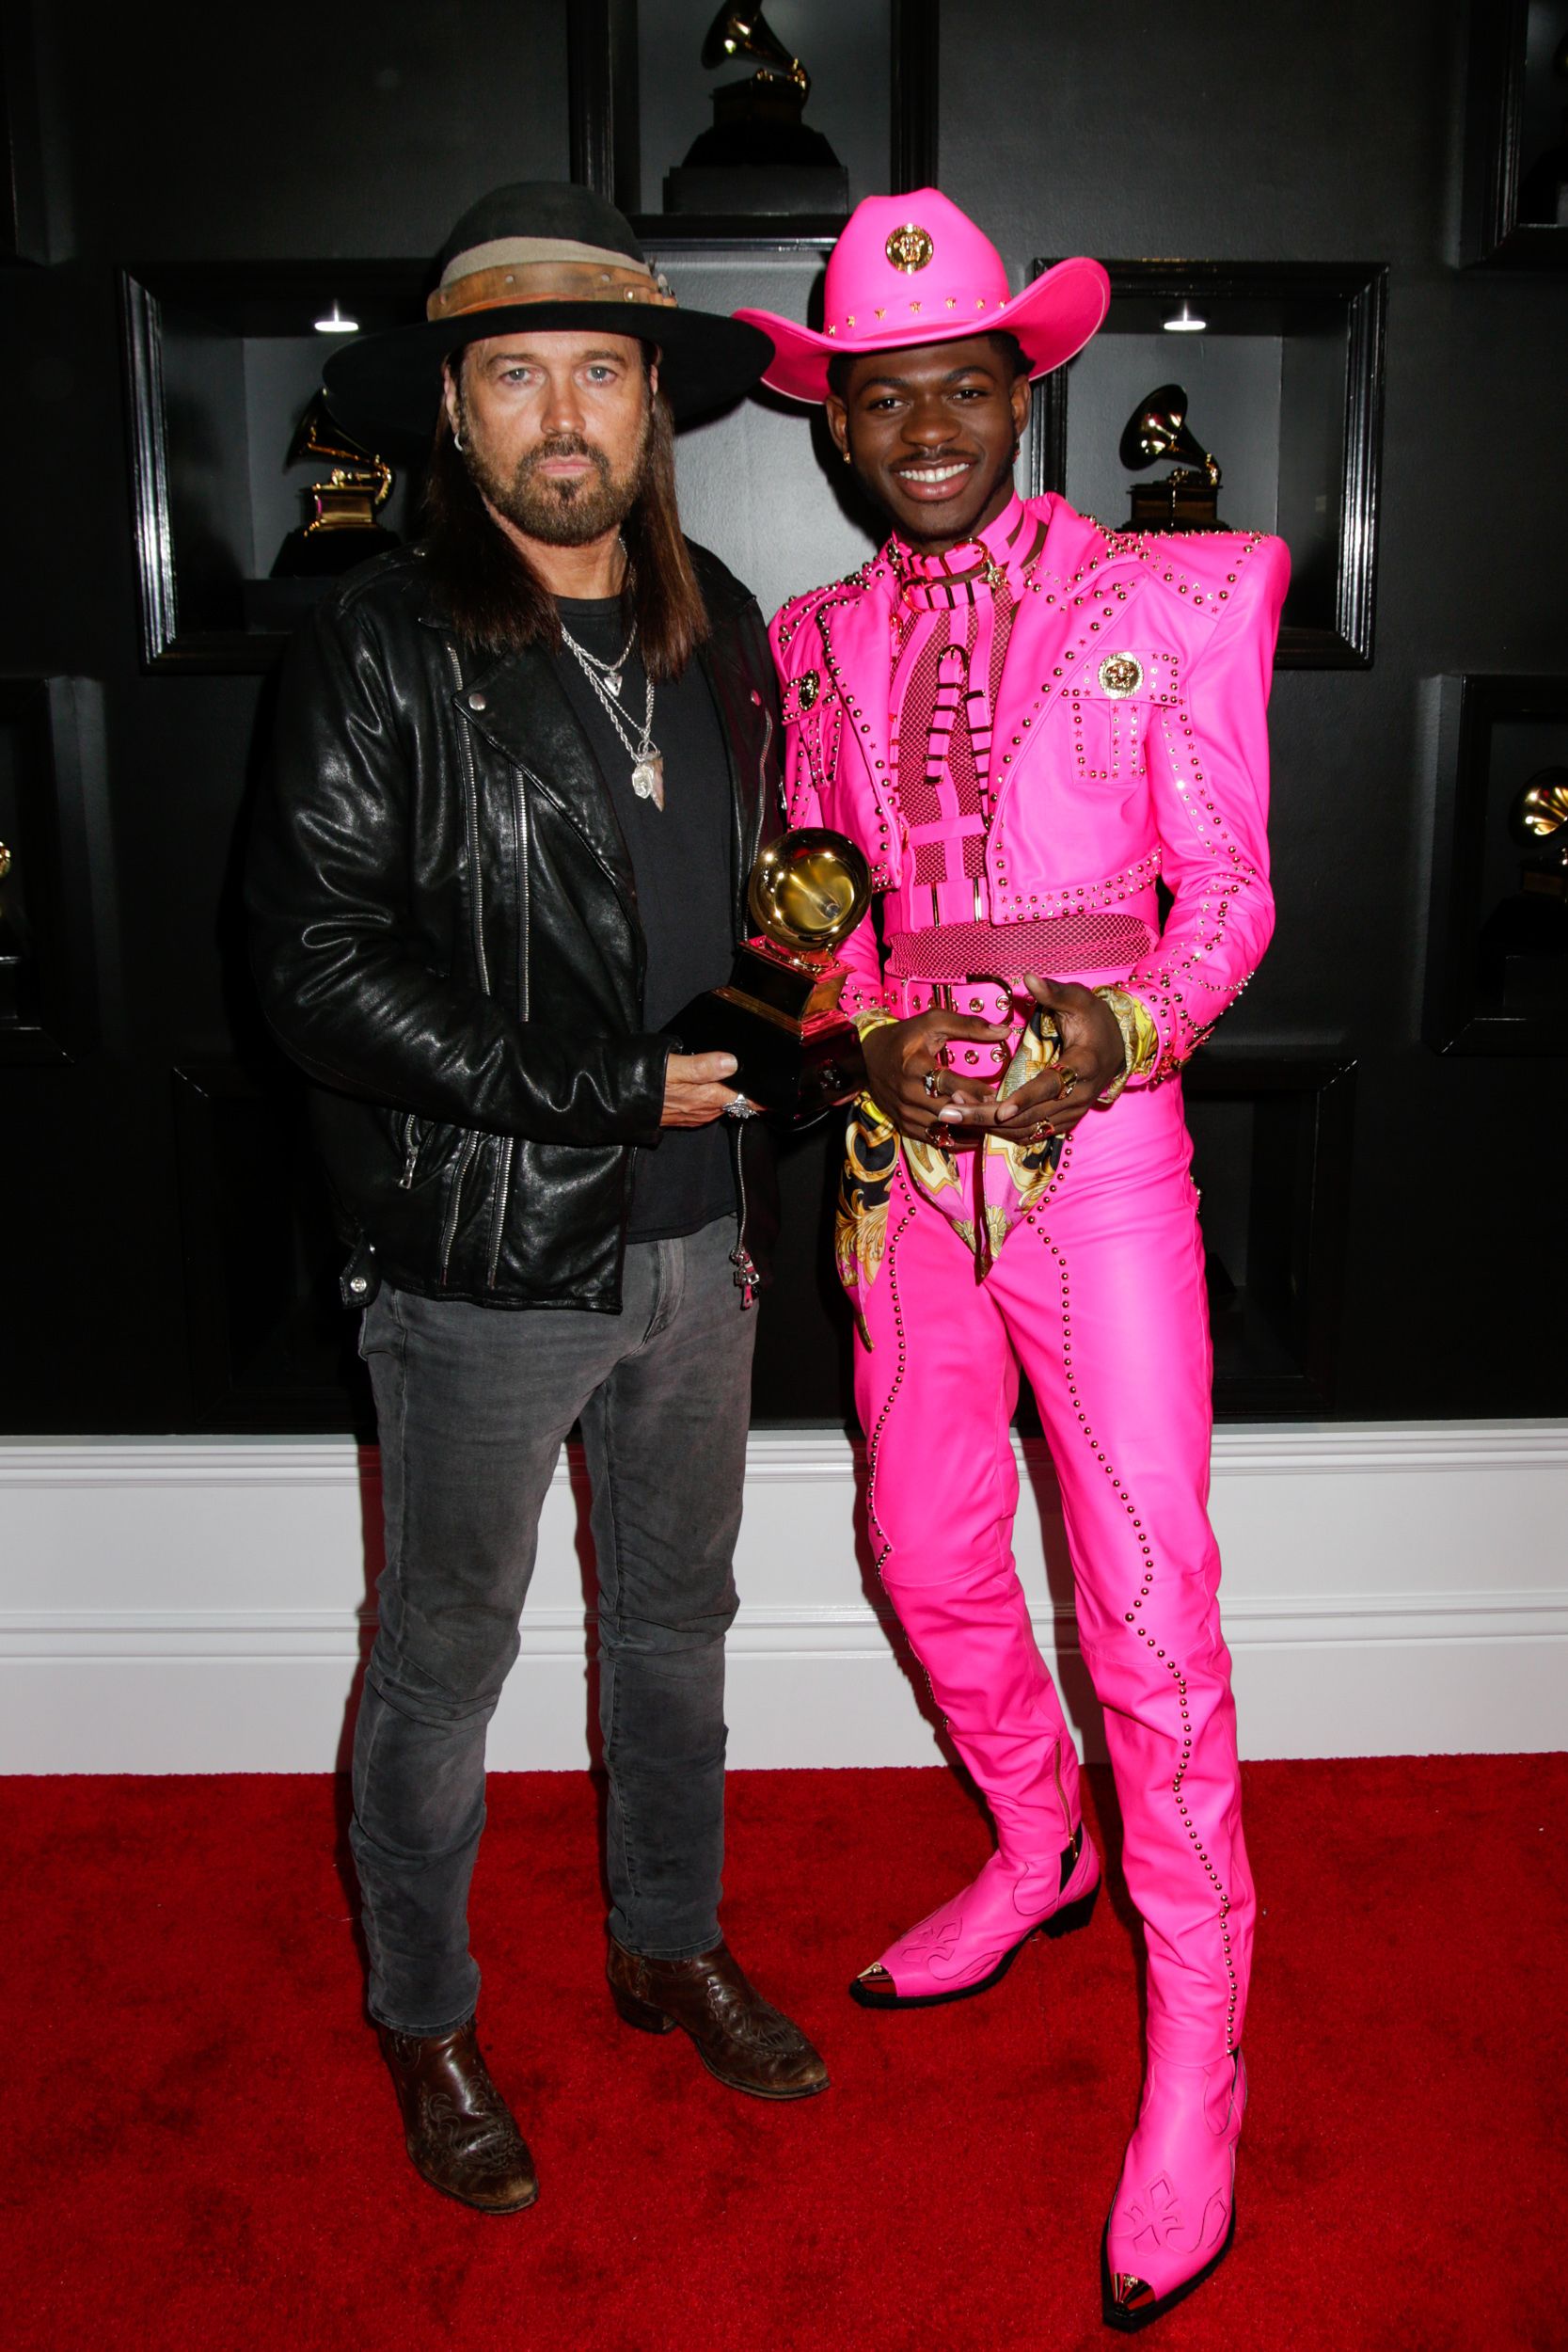 Miley Cyrus Billy Ray Cyrus Have Sex - Billy Ray Cyrus 'Would Die' for Lil Nas X